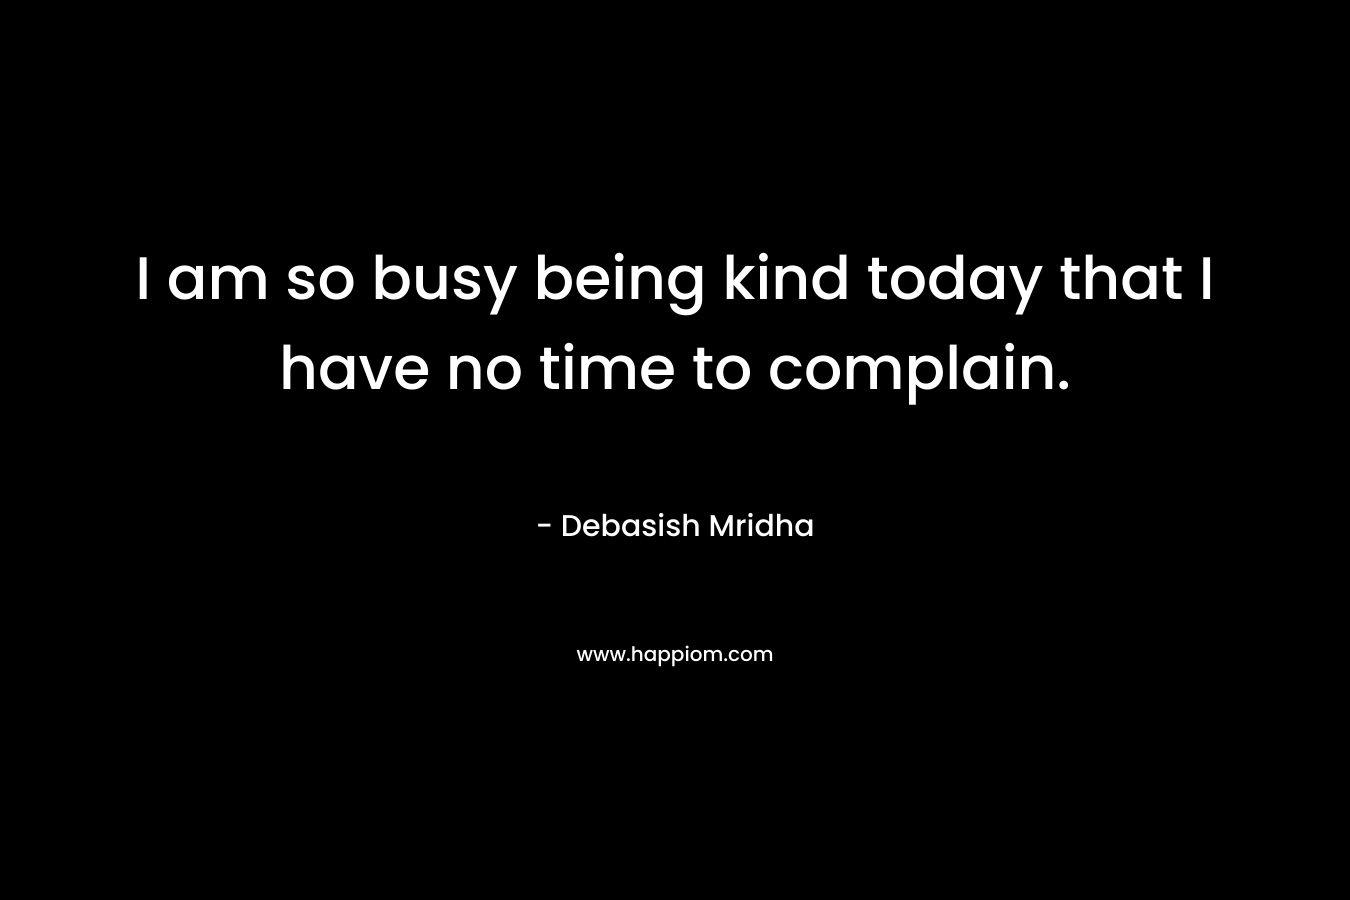 I am so busy being kind today that I have no time to complain. – Debasish Mridha